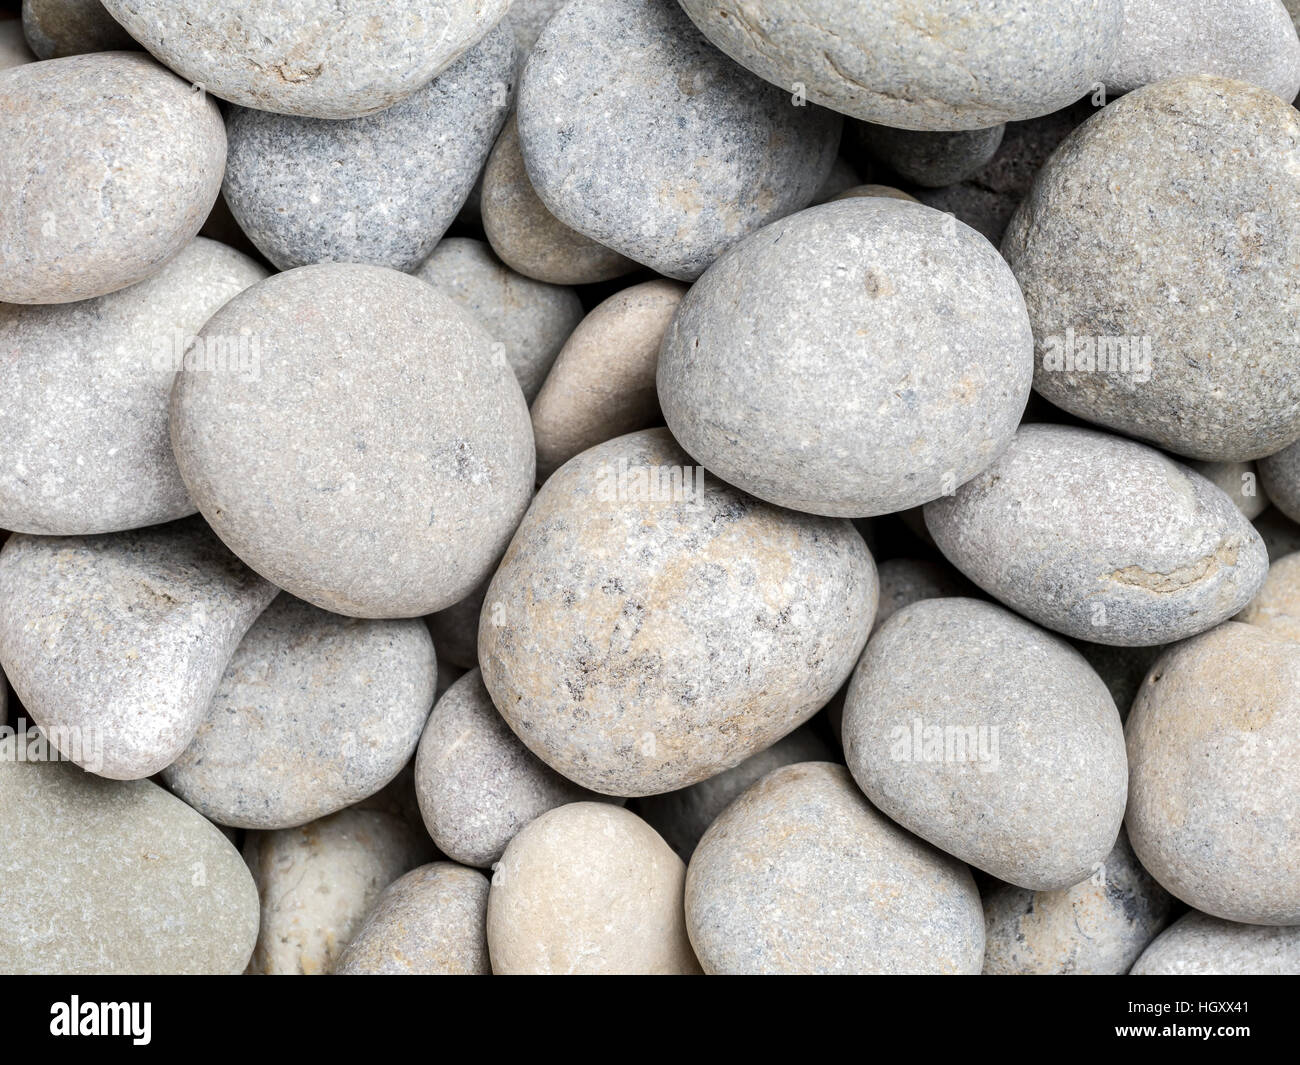 Grey pebbles shot from above Stock Photo